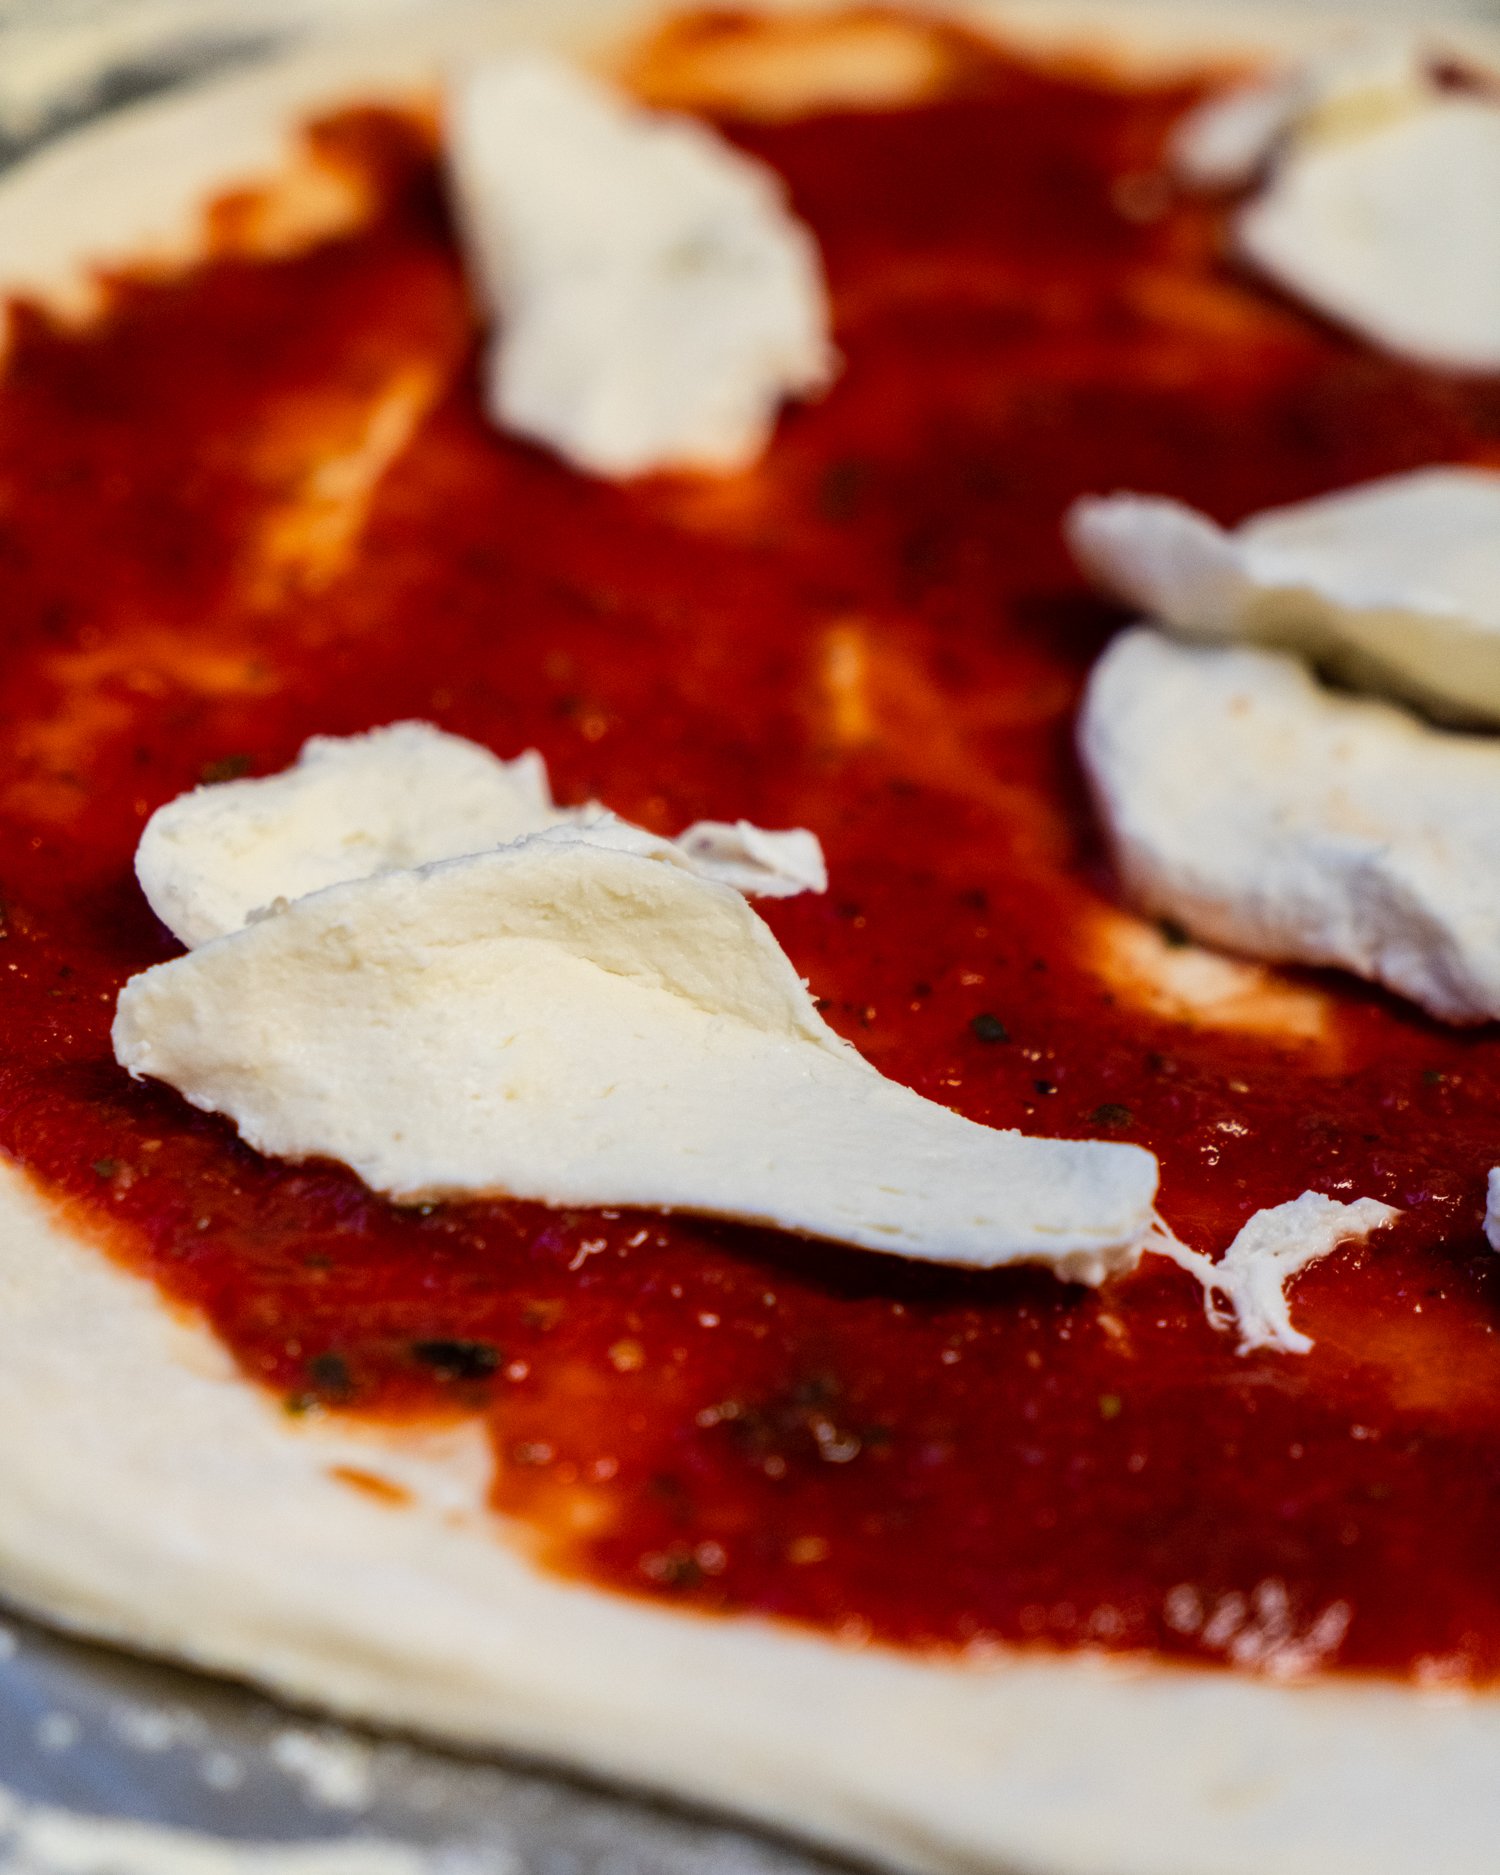  Nothing better than fresh, hand-pulled mozzarella!  